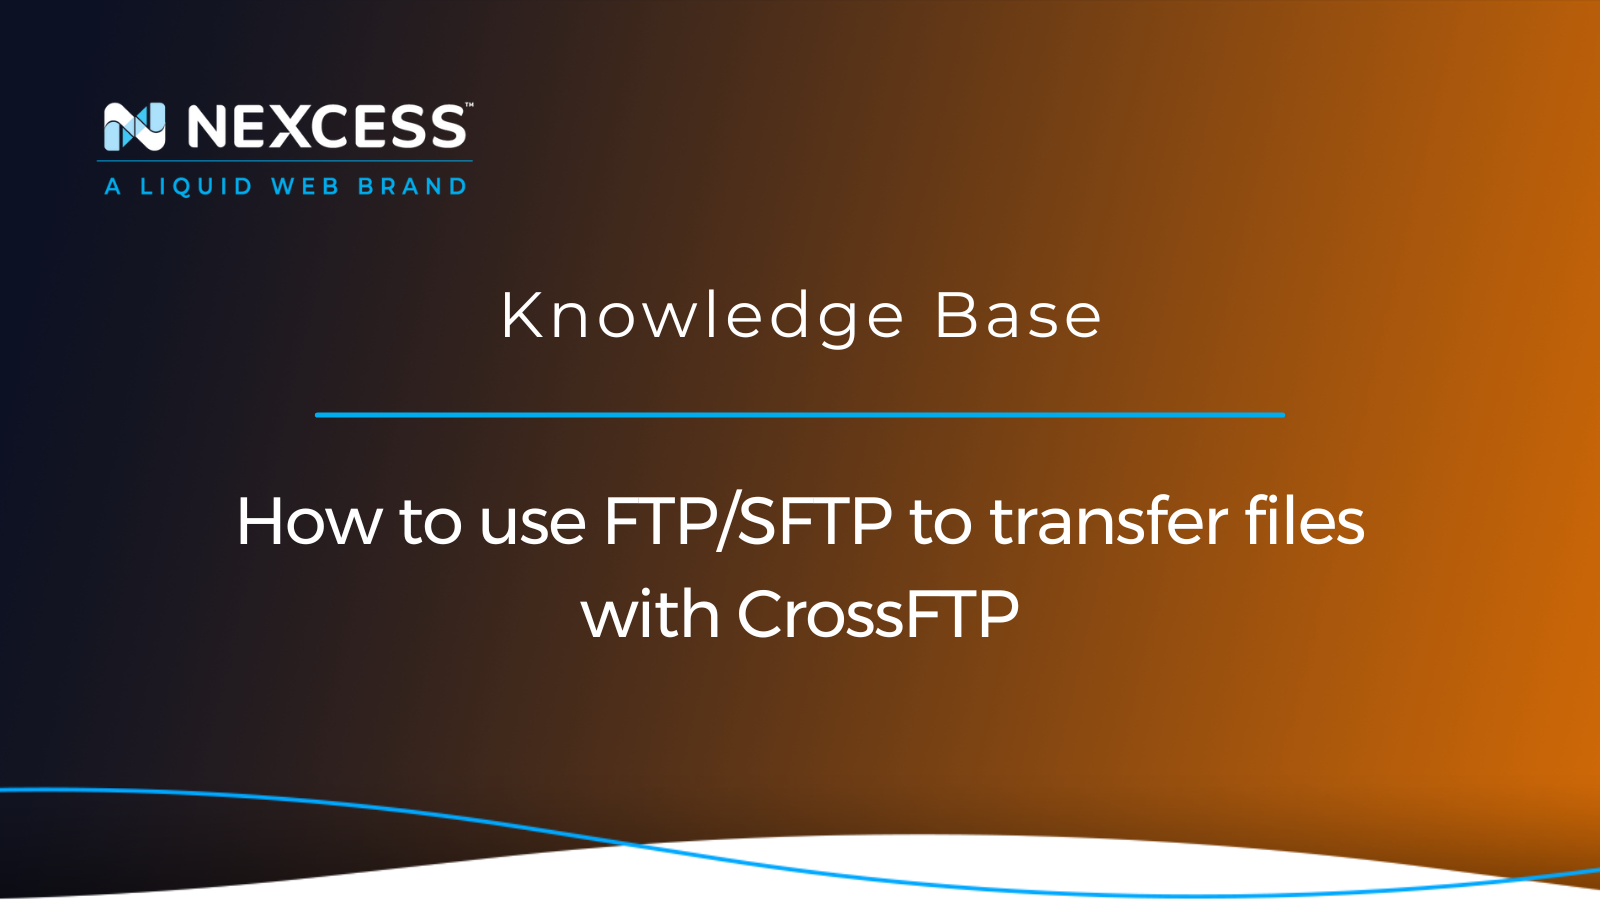 How to use FTP/SFTP to transfer files with CrossFTP